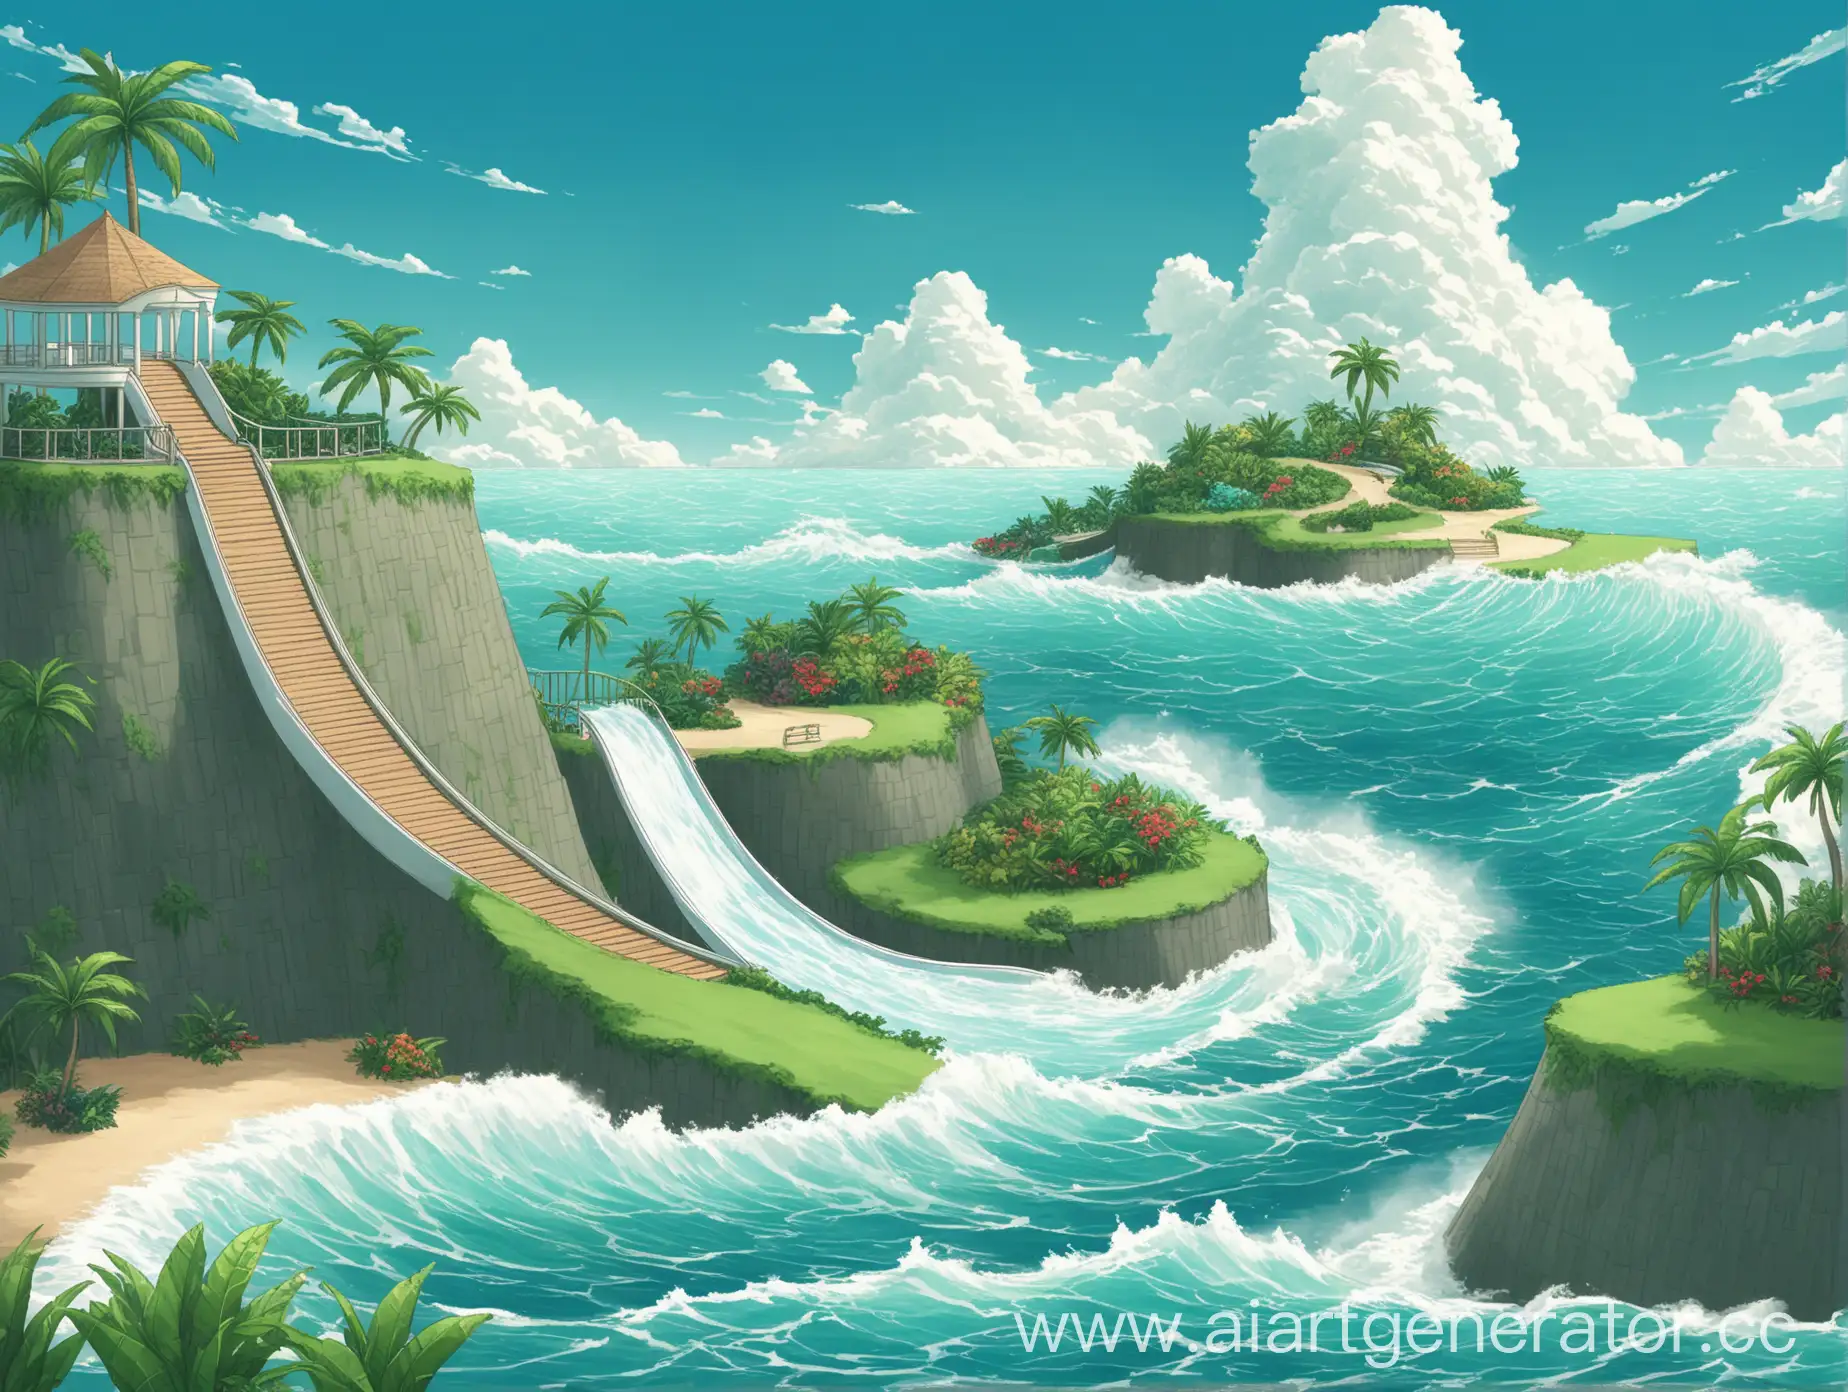 Draw a sea with one island on which there is a waterslide leading into the sea. The sea should have turbulent waves, and the island should have plenty of plants and greenery. The sky is calm and clear.